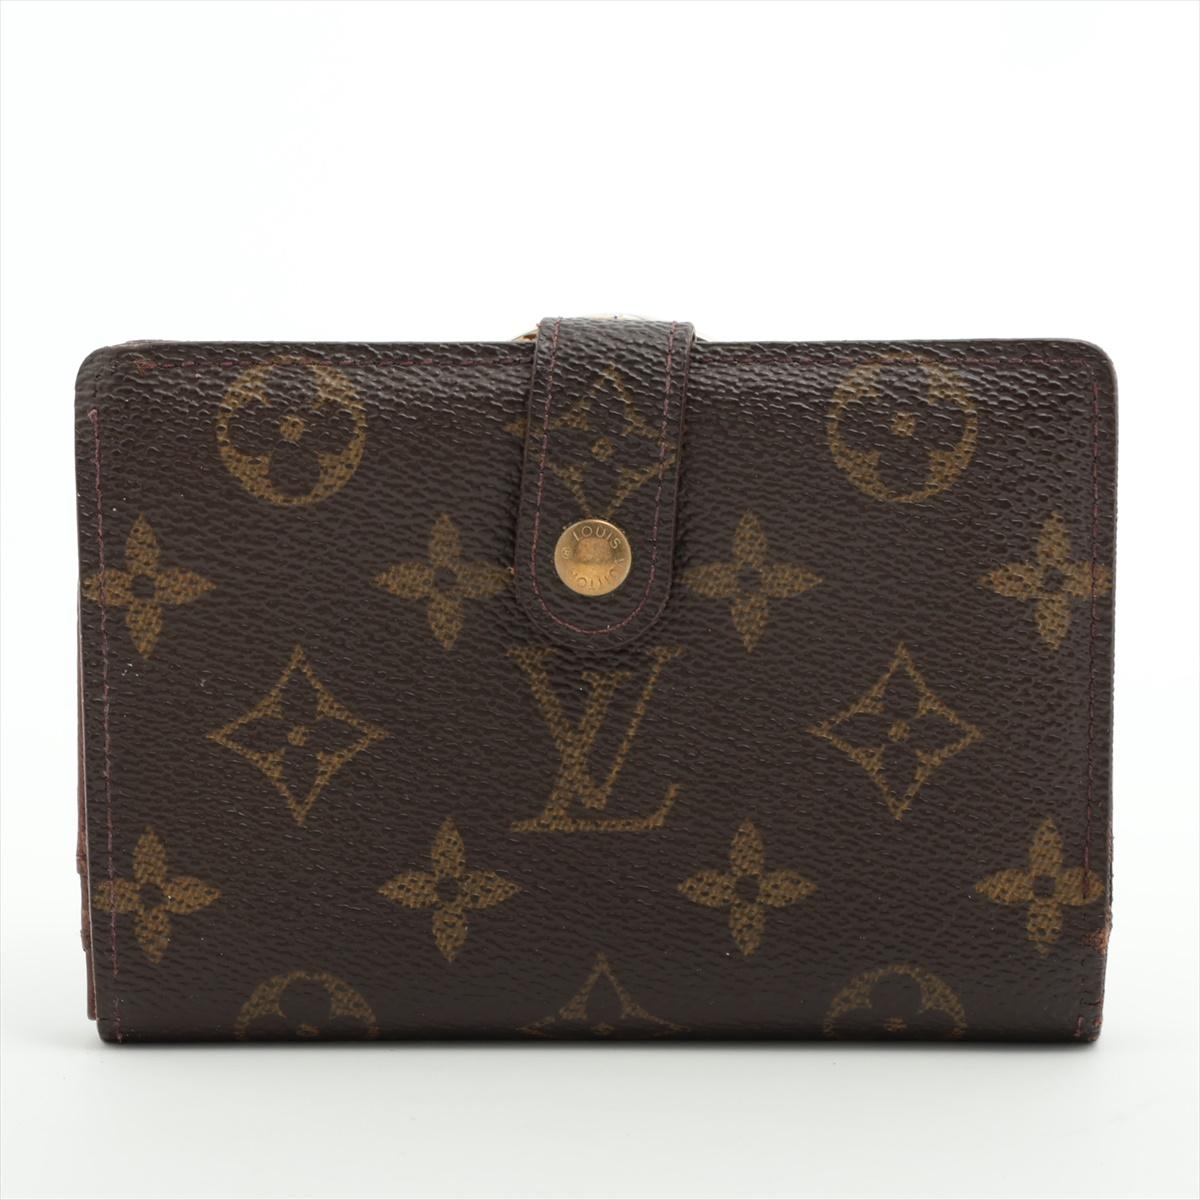 The Louis Vuitton Monogram Viennois Wallet in Brown is a luxurious and timeless accessory that epitomizes the brand's heritage and craftsmanship. Crafted from Louis Vuitton's iconic Monogram canvas, the wallet exudes sophistication and elegance. The